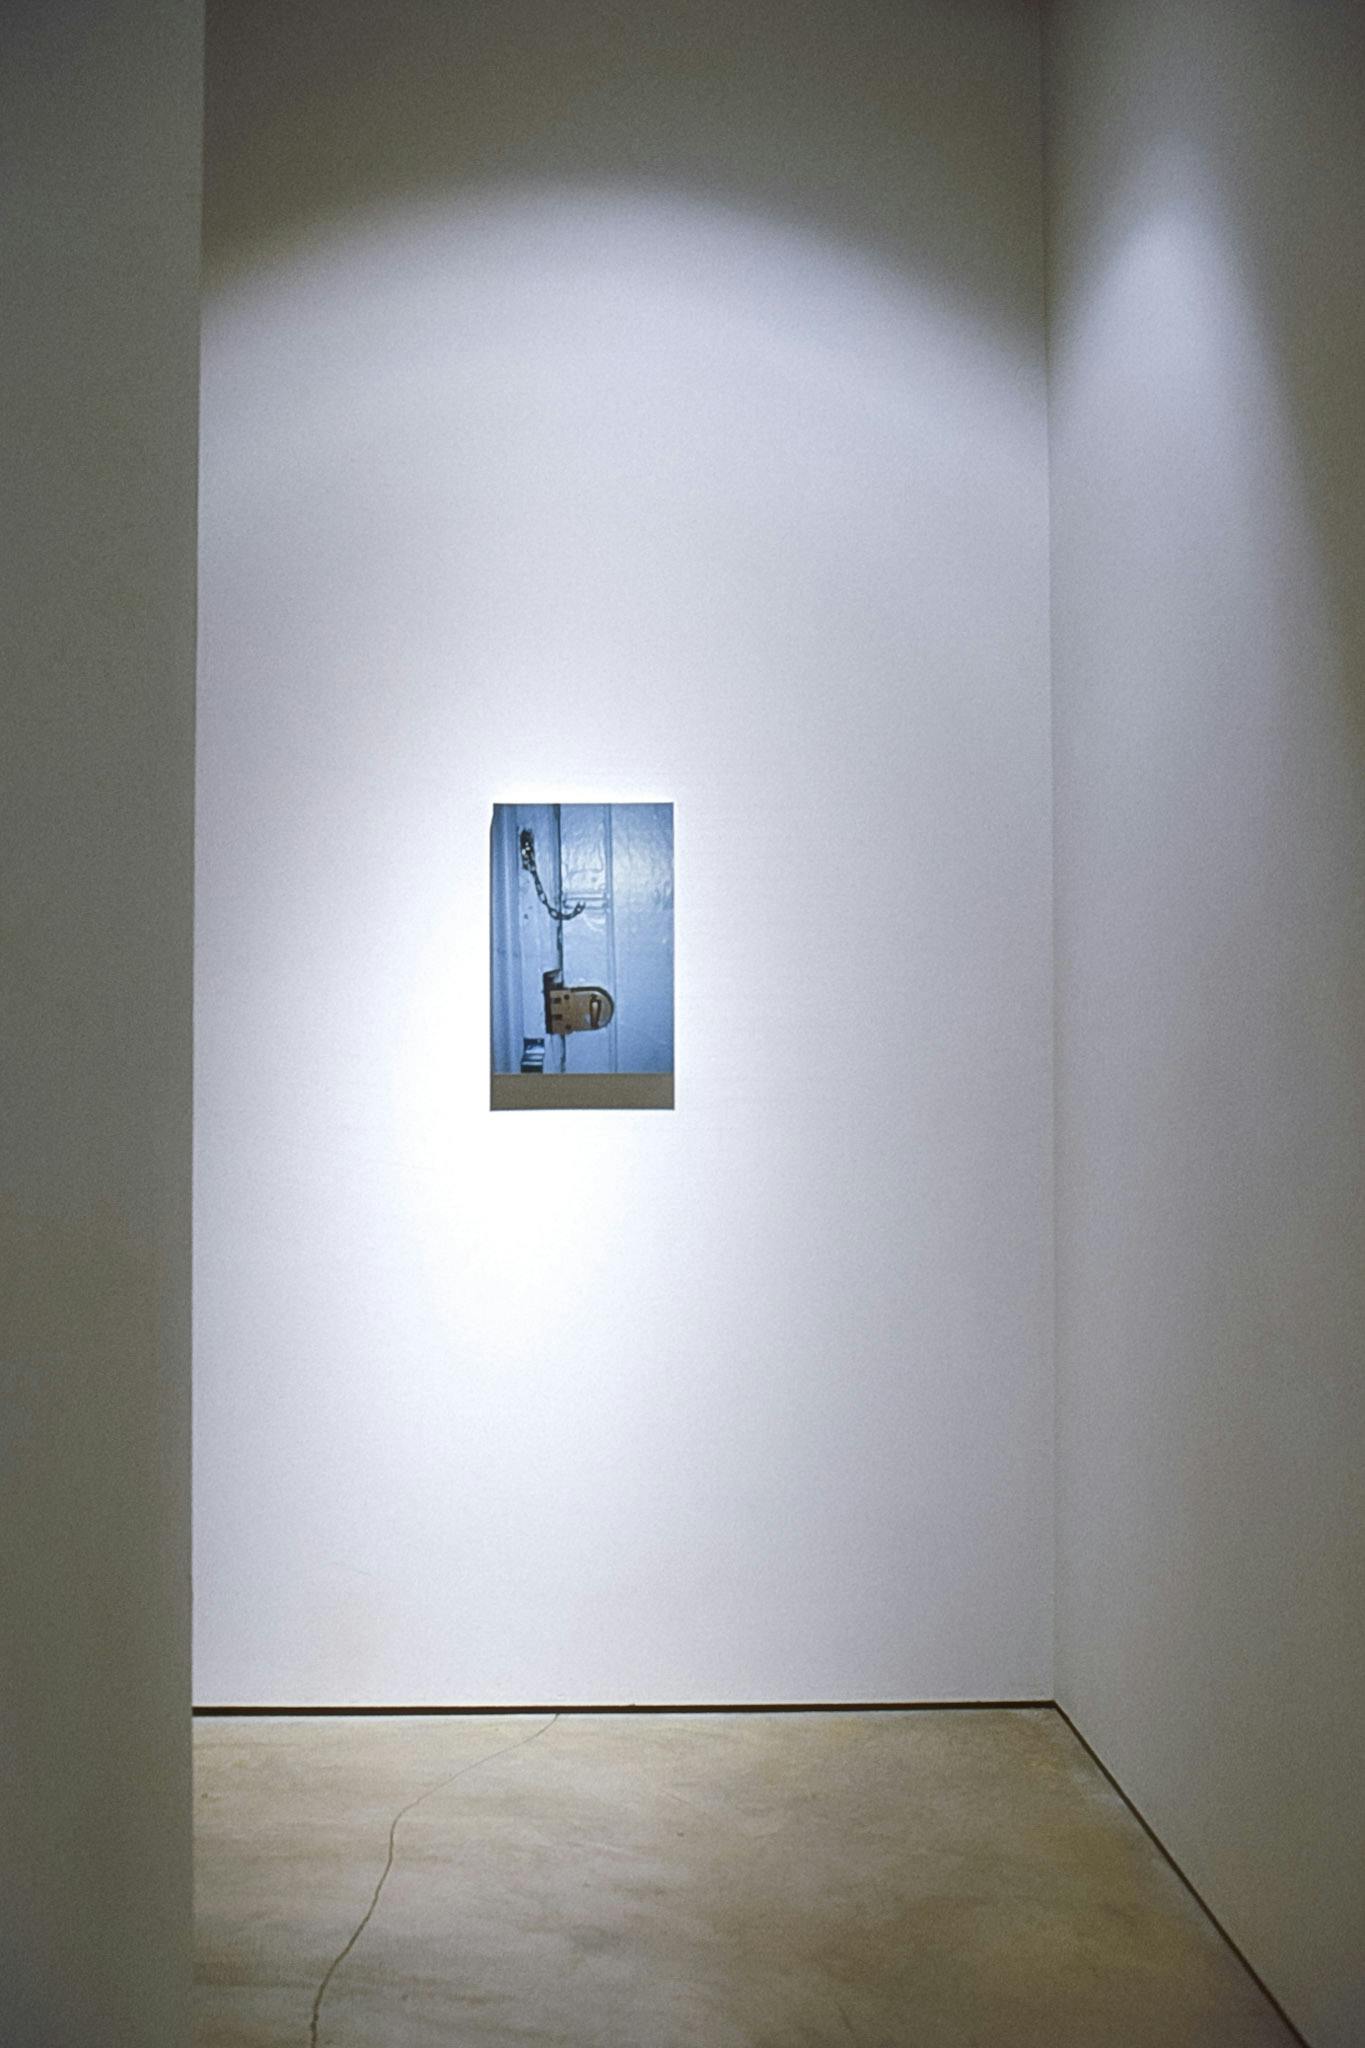 A view of a gallery corner shows a small photograph mounted on the wall. The piece shows a part of a light blue door with a metal lock and a chain lock.